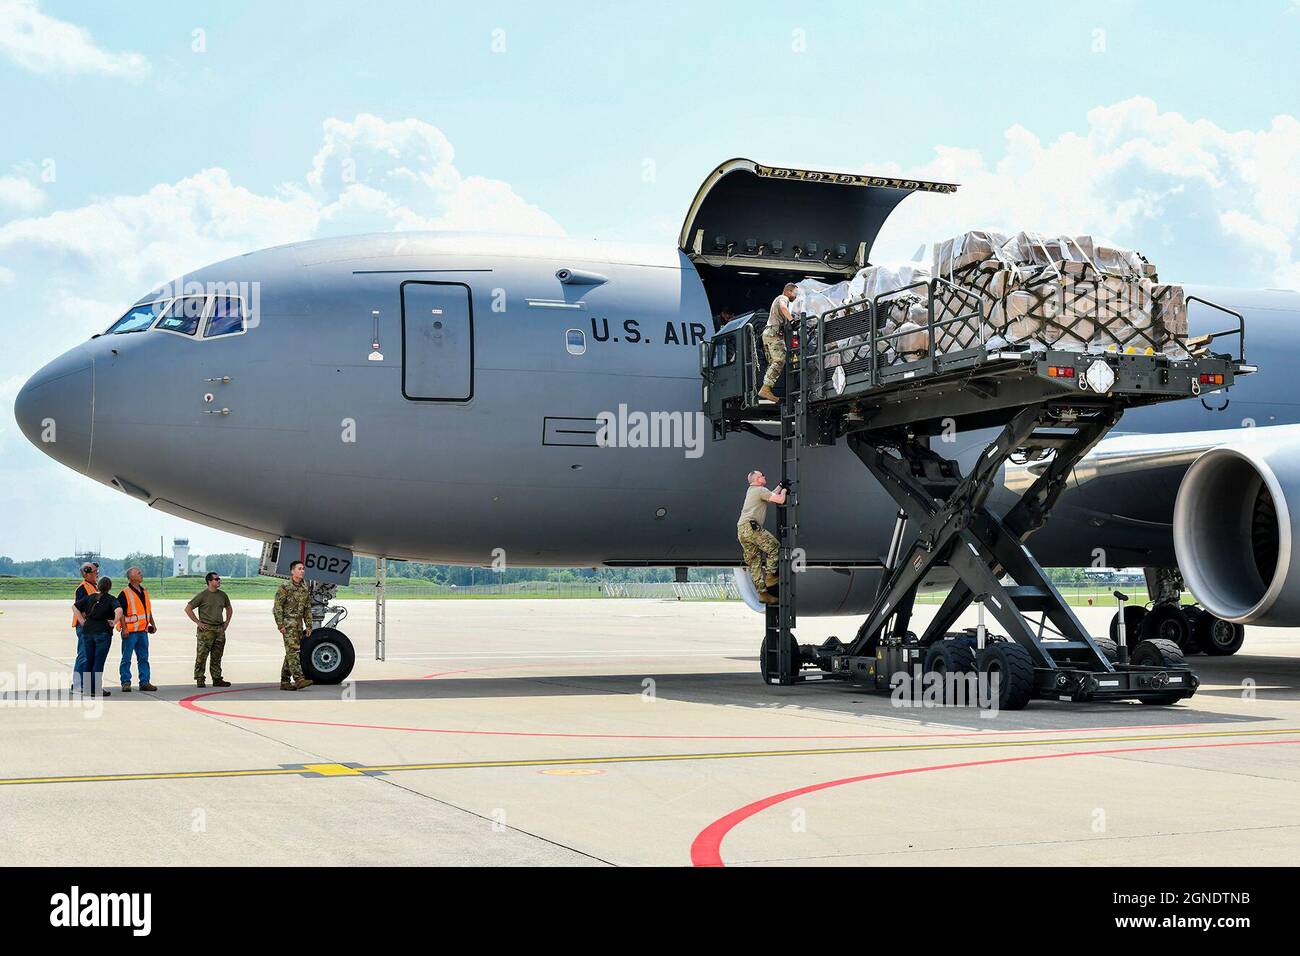 A KC-46A Pegasus being loaded at Selfridge Air National Guard Base, Michigan, on July 29, 2021 by 127th Logistics Readiness Squadron. The KC-46A is the first phase in recapitalizing the U.S. Air Force's aging tanker fleet. With greater refueling, cargo, and aeromedical evacuation capabilities the Pegasus provides next generation aerial refueling support to Air Force, Navy, Marine Corps and partner-nation receivers. (U.S. Air National Guard photo by Munnaf H. Joarder) Stock Photo